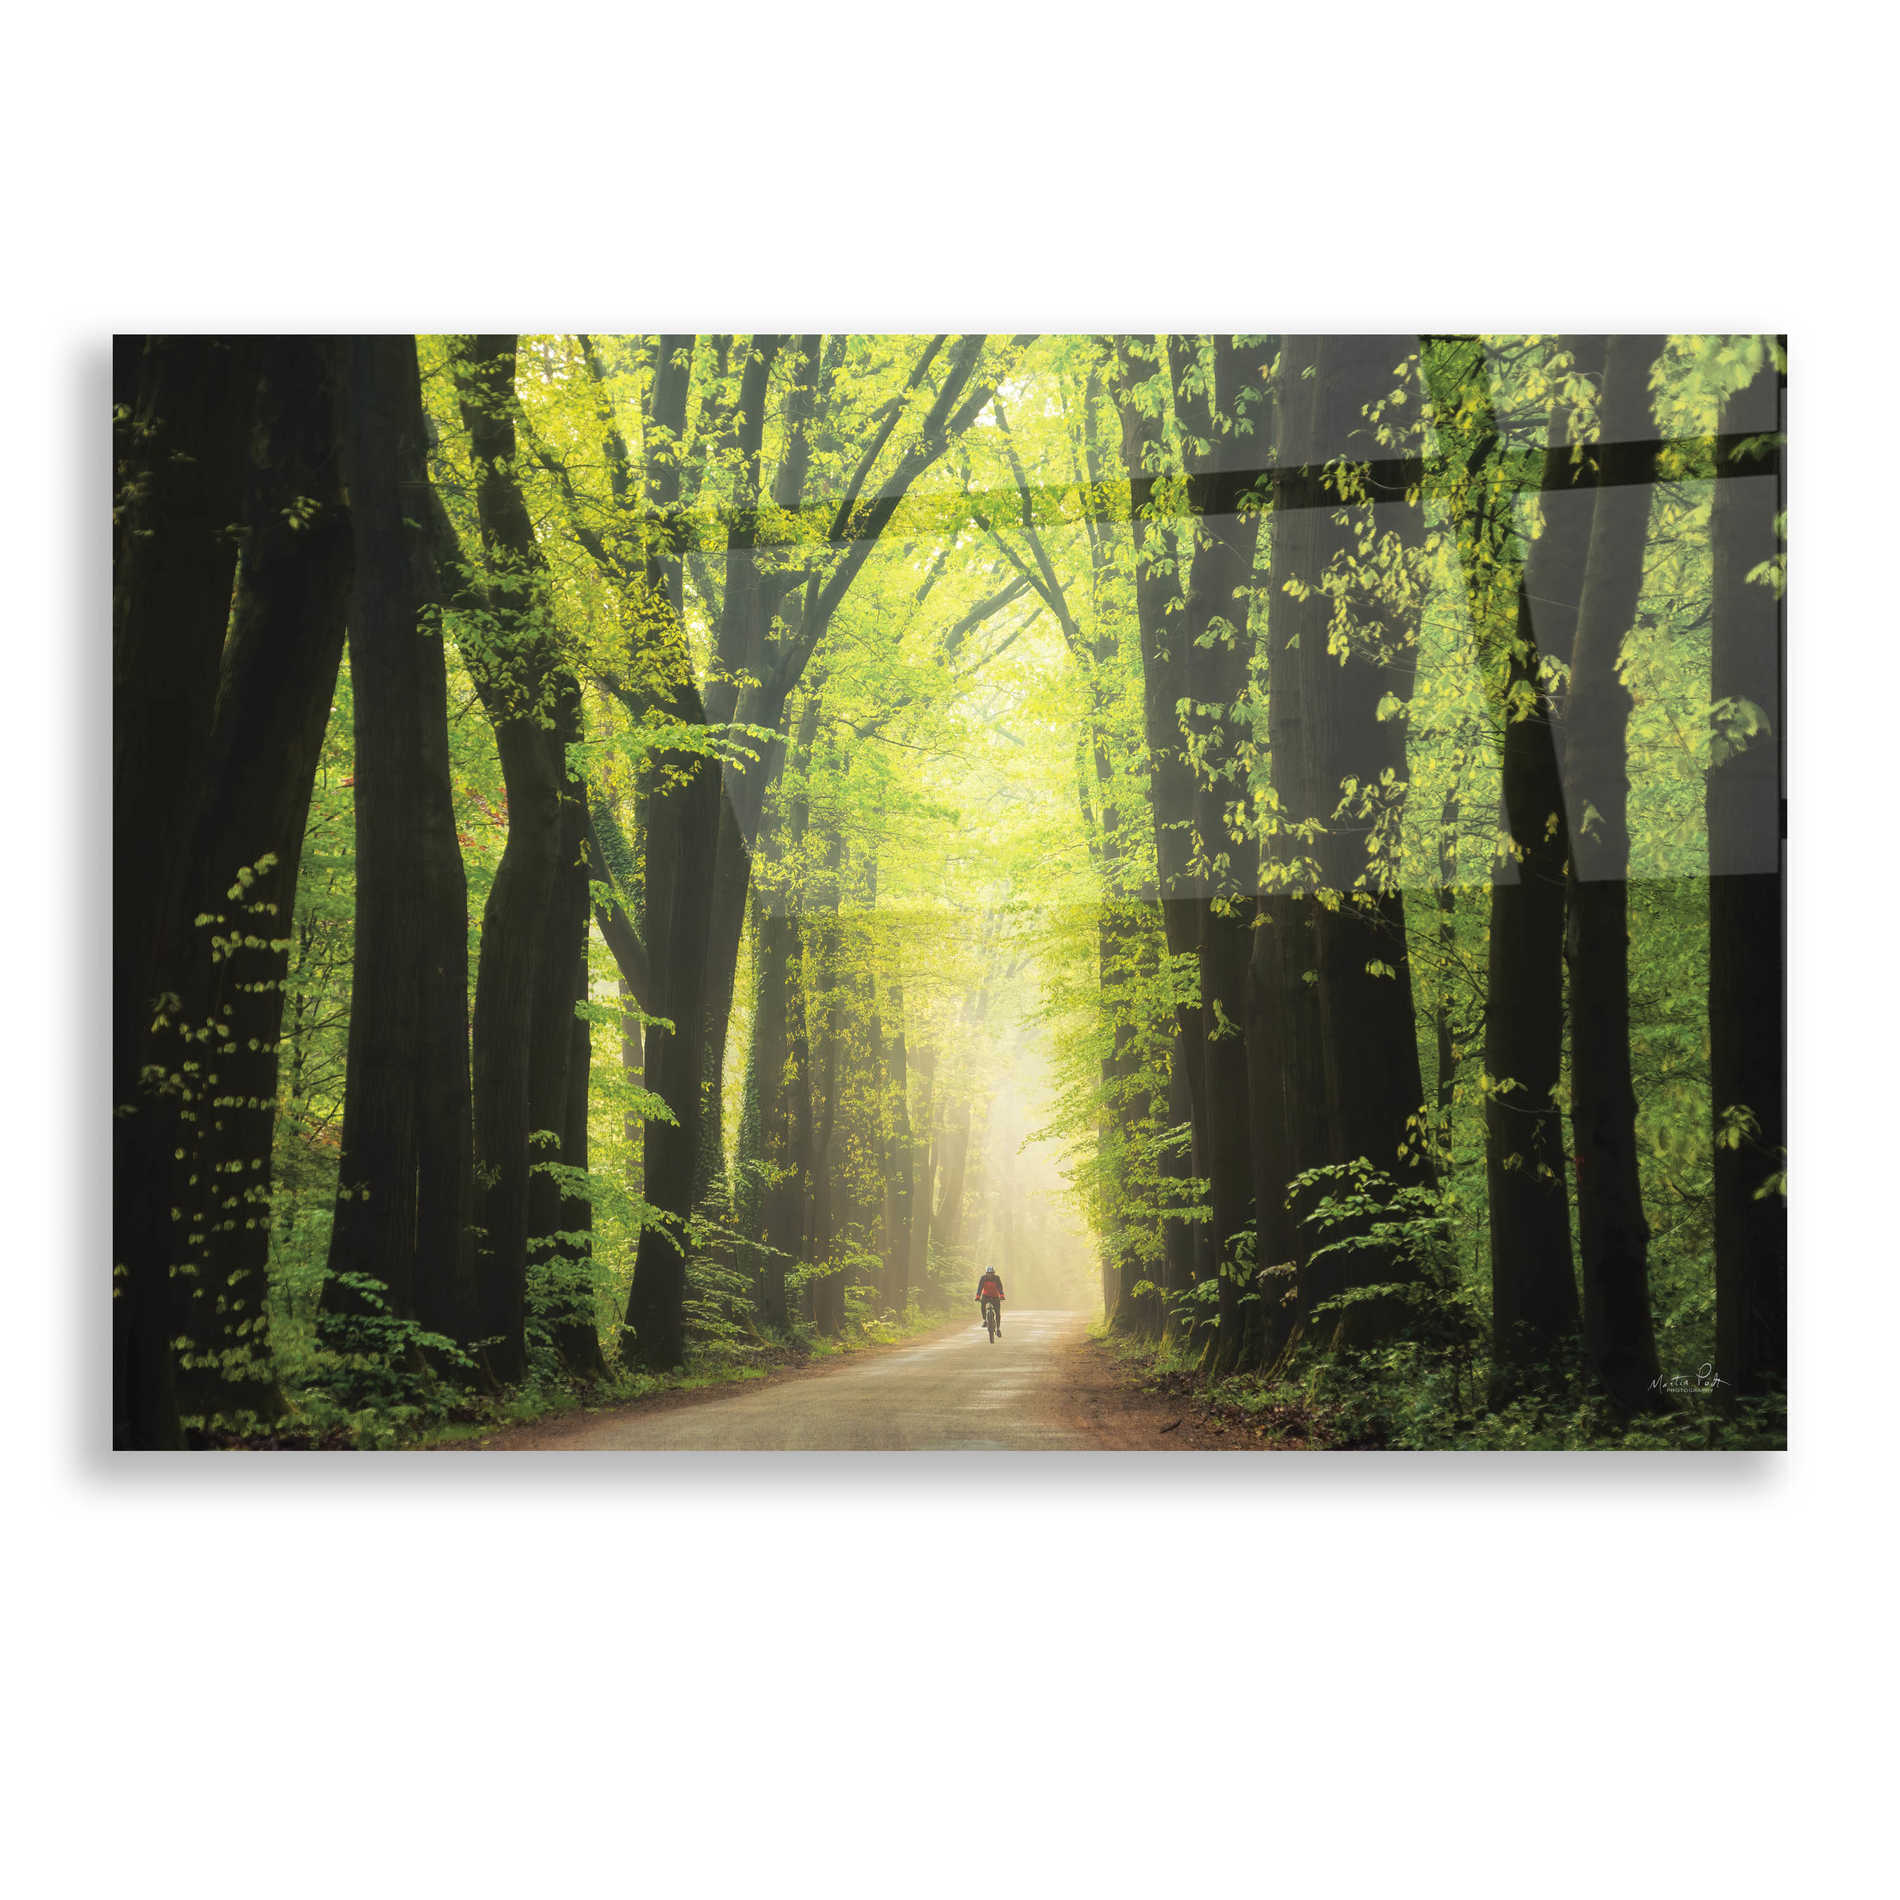 Epic Art 'Among Giants in Springtime' by Martin Podt, Acrylic Glass Wall Art,16x12